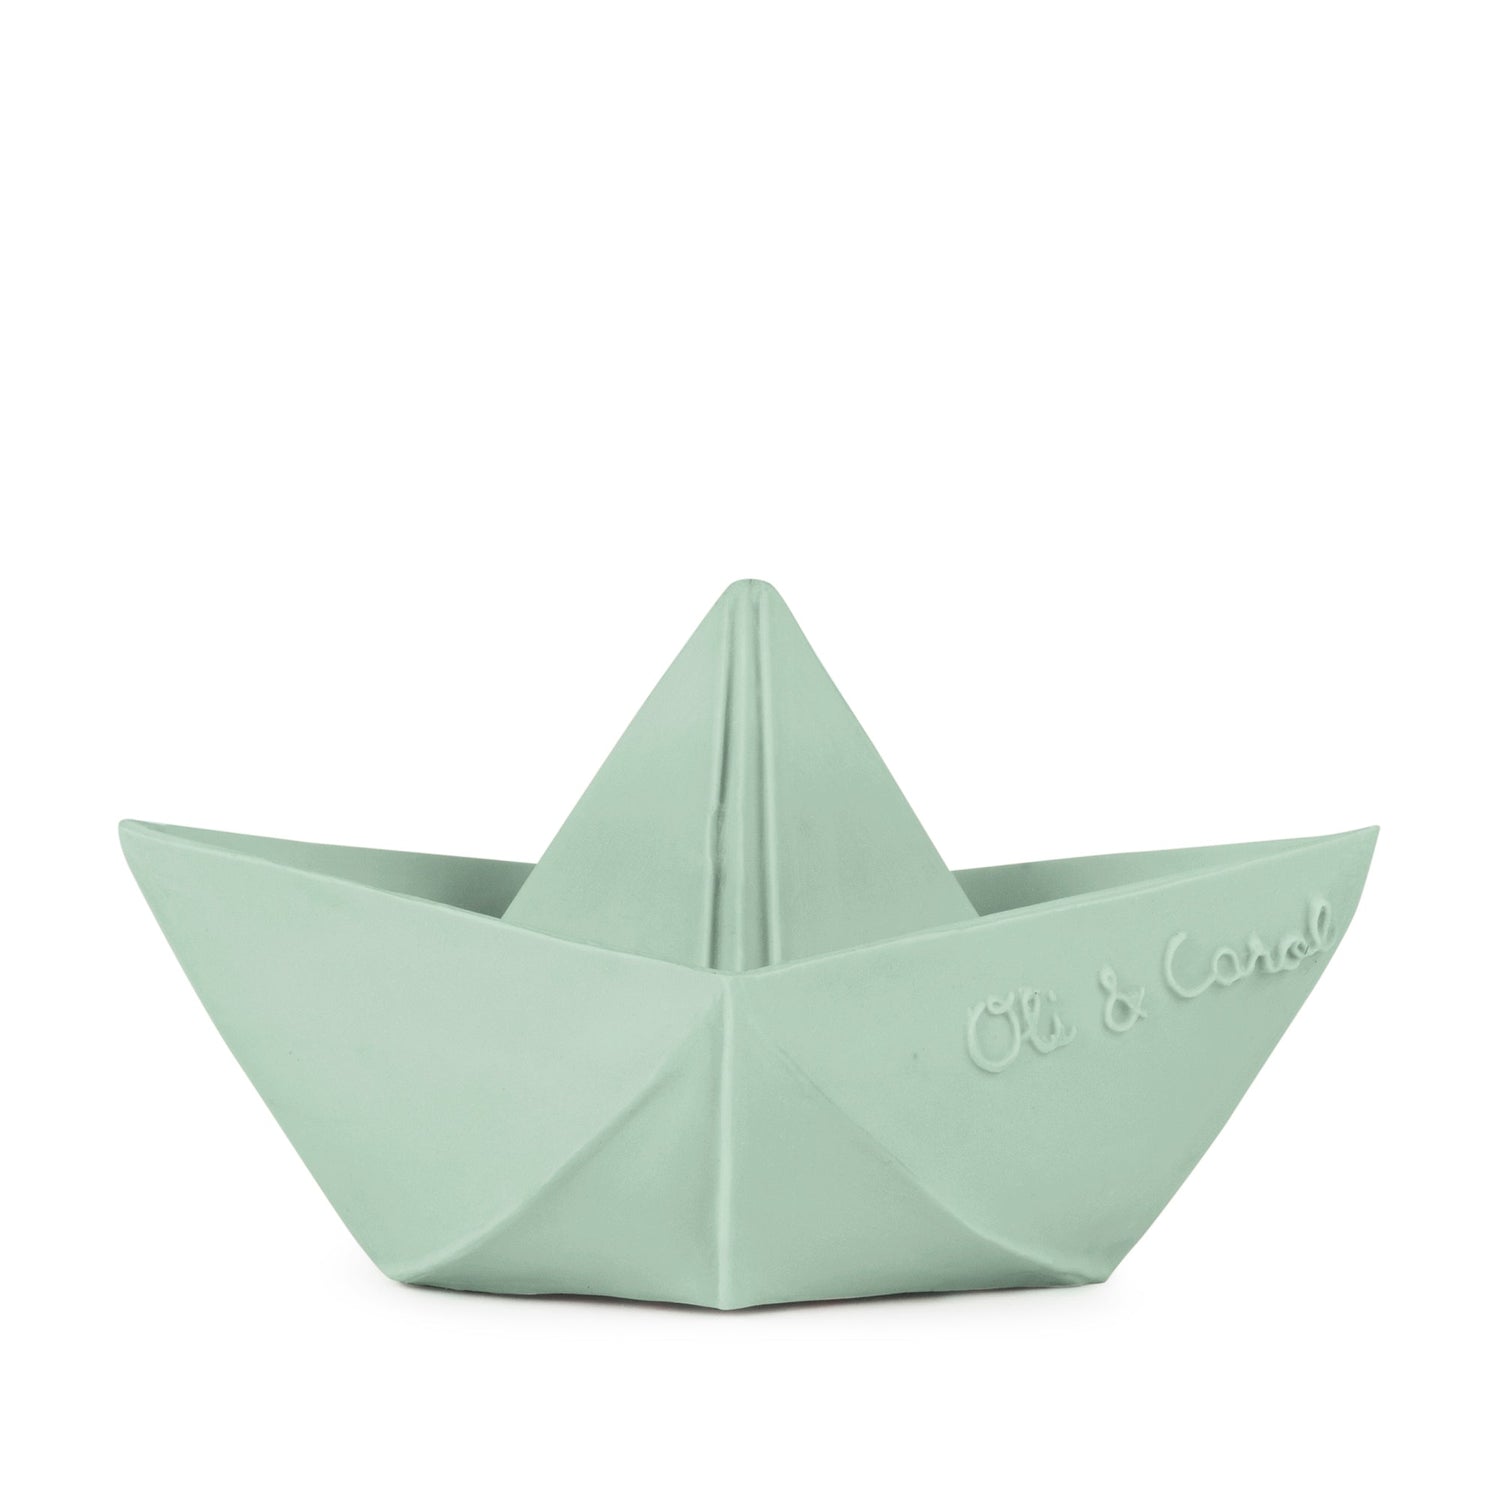 The natural rubber origami boat creates endless fun for babies and kids. Entertaining them in the tub and enlightening their senses wherever they go. safe for kids, worry free play! Oli & Carol products are made following an artisanal and sustainable process with 100% natural rubber from hevea trees.